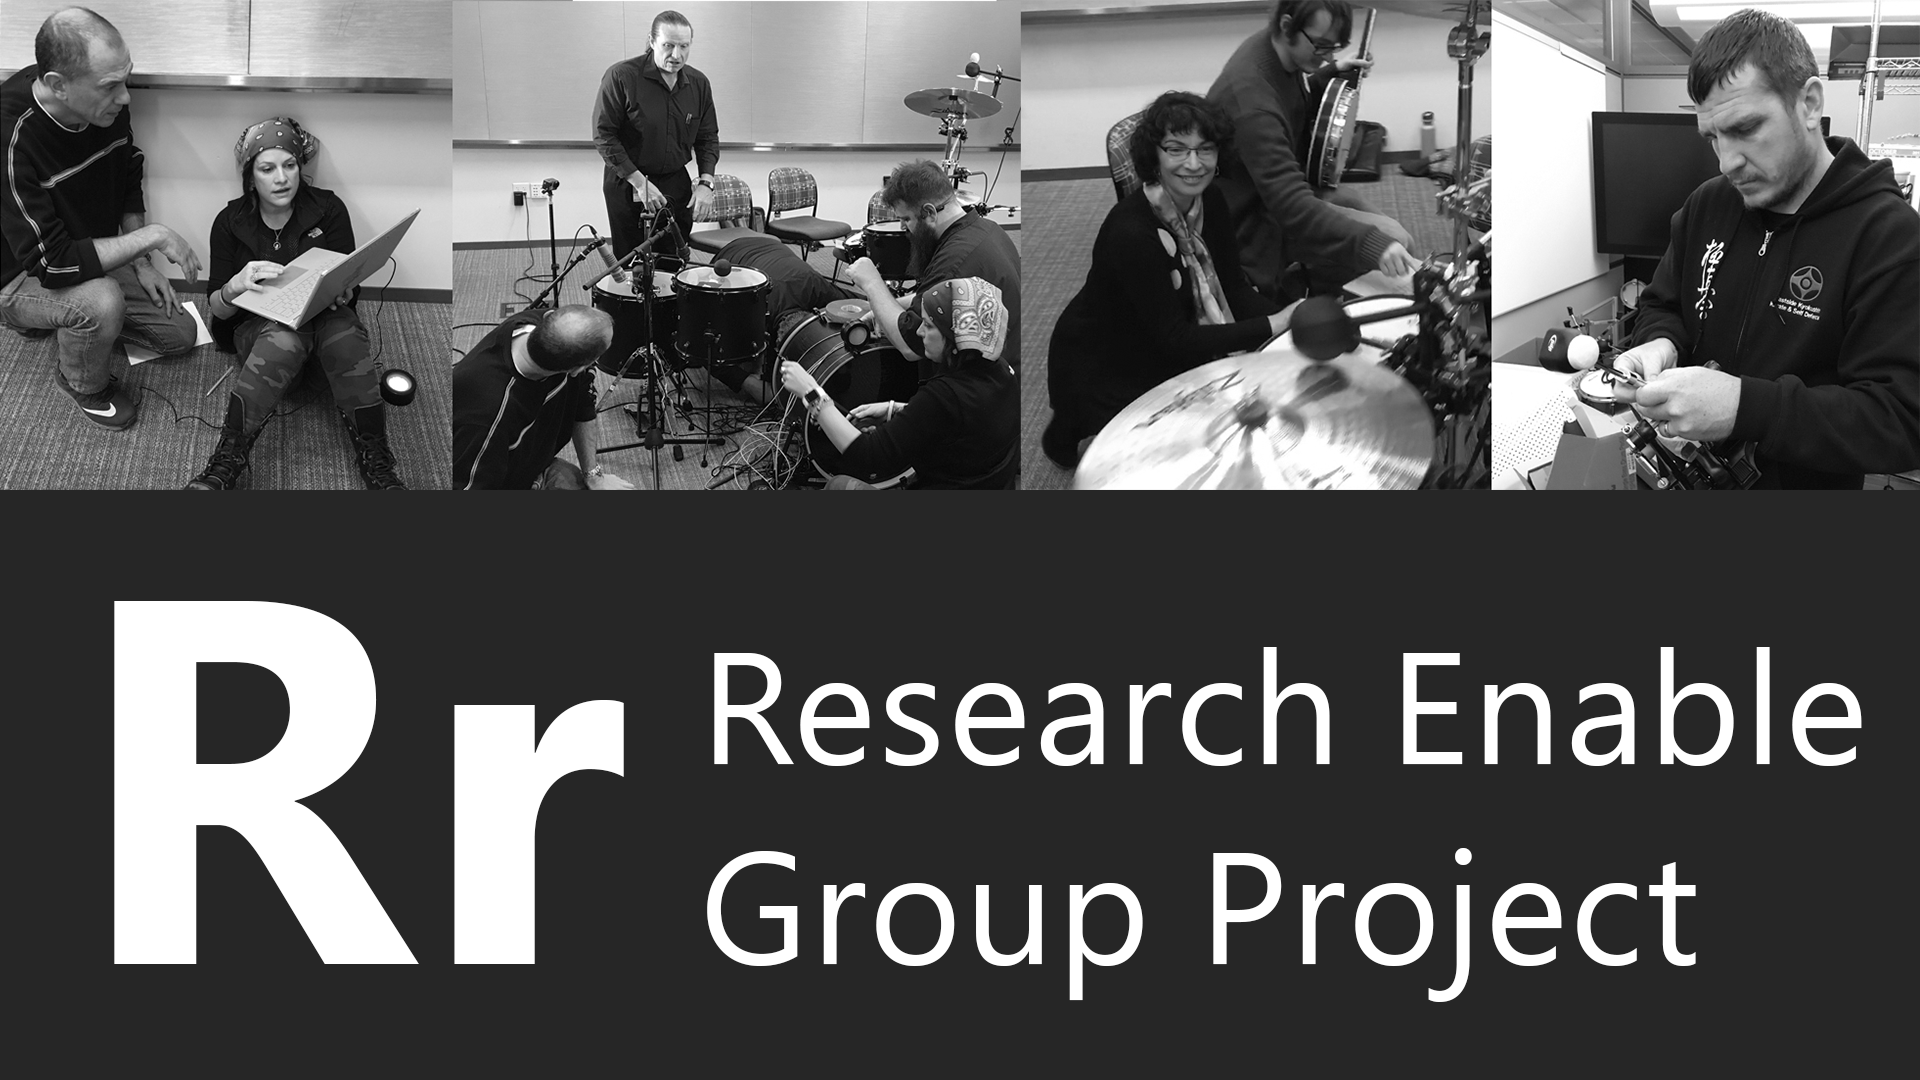 R is for research enable group. Members of the research enable group project work on their products. A man and woman look at a laptop, multiple members adjust a drum set and measure sound.